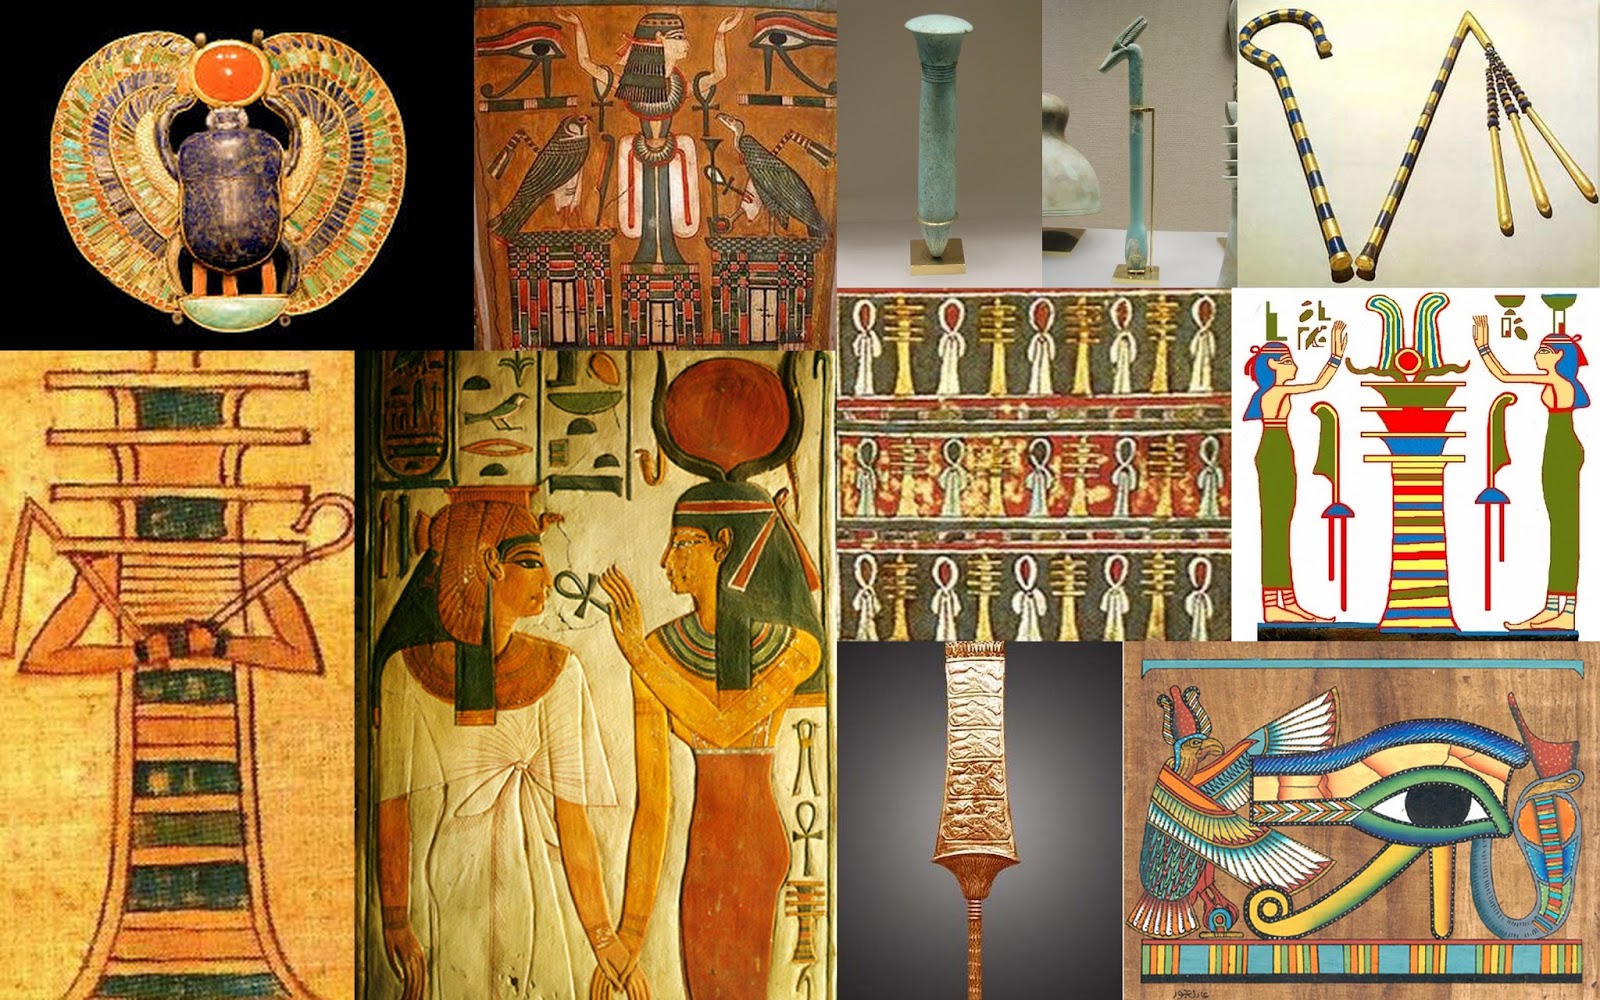 I should be writing: What does it all mean? Egyptian Symbols